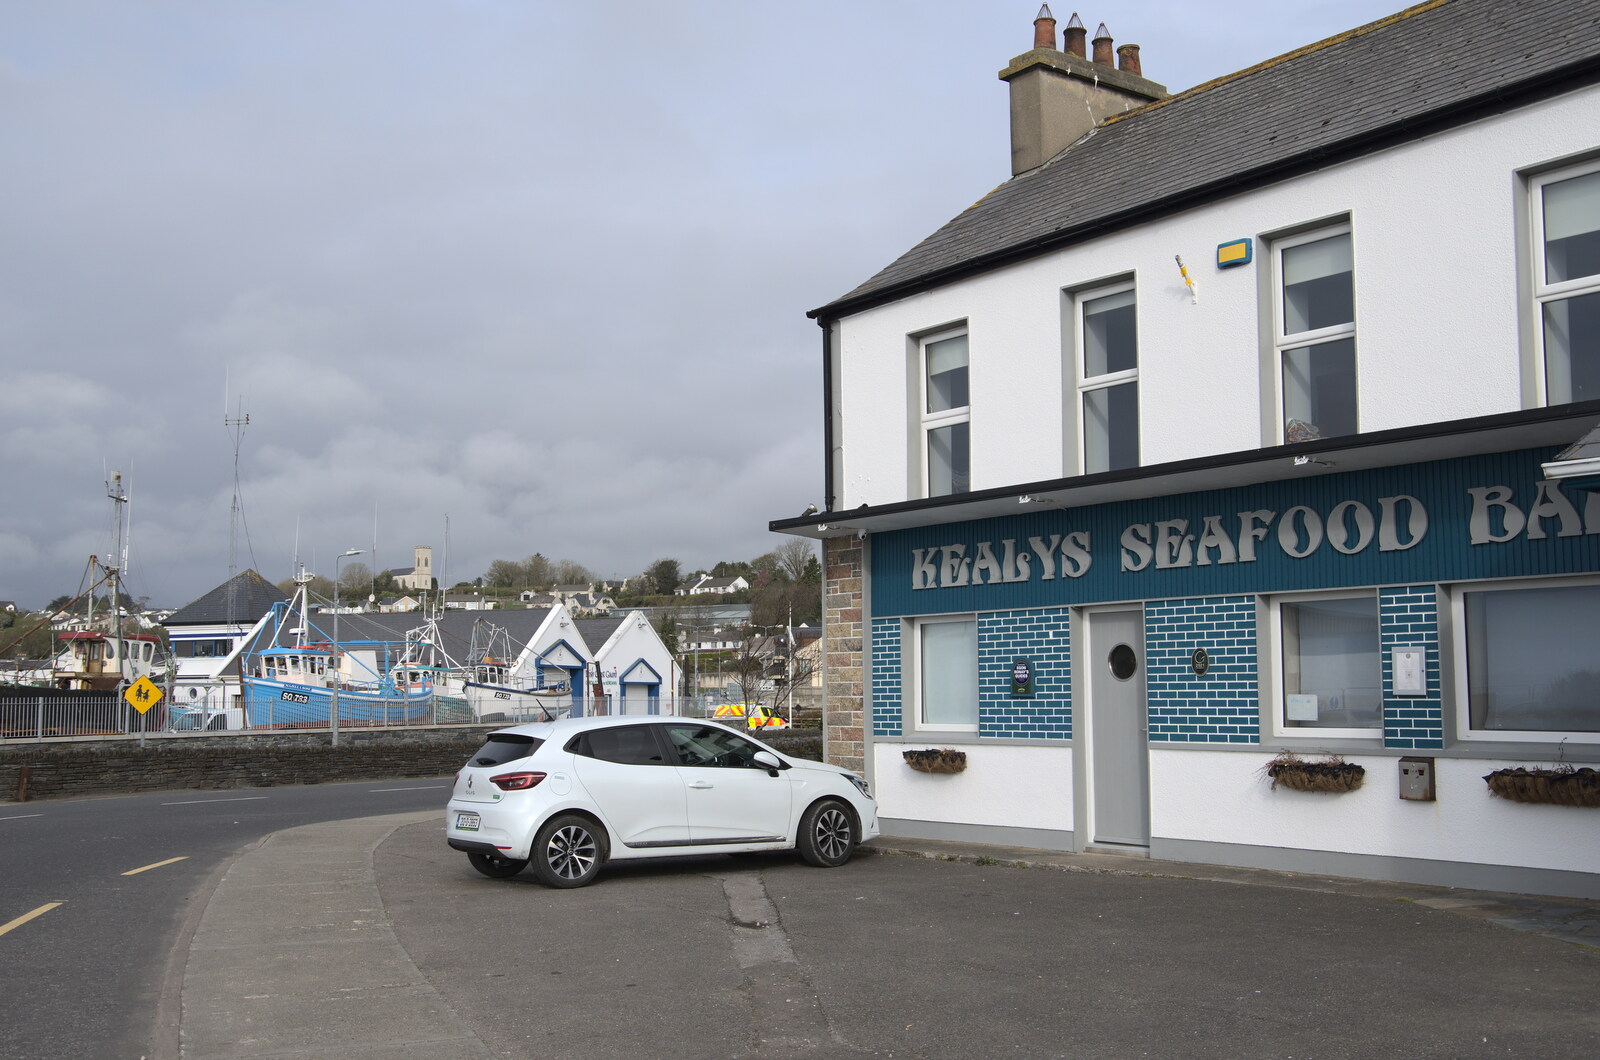 Greencastle, Doagh and Malin Head, County Donegal, Ireland - 19th April 2022: The hire car outside Kealy's